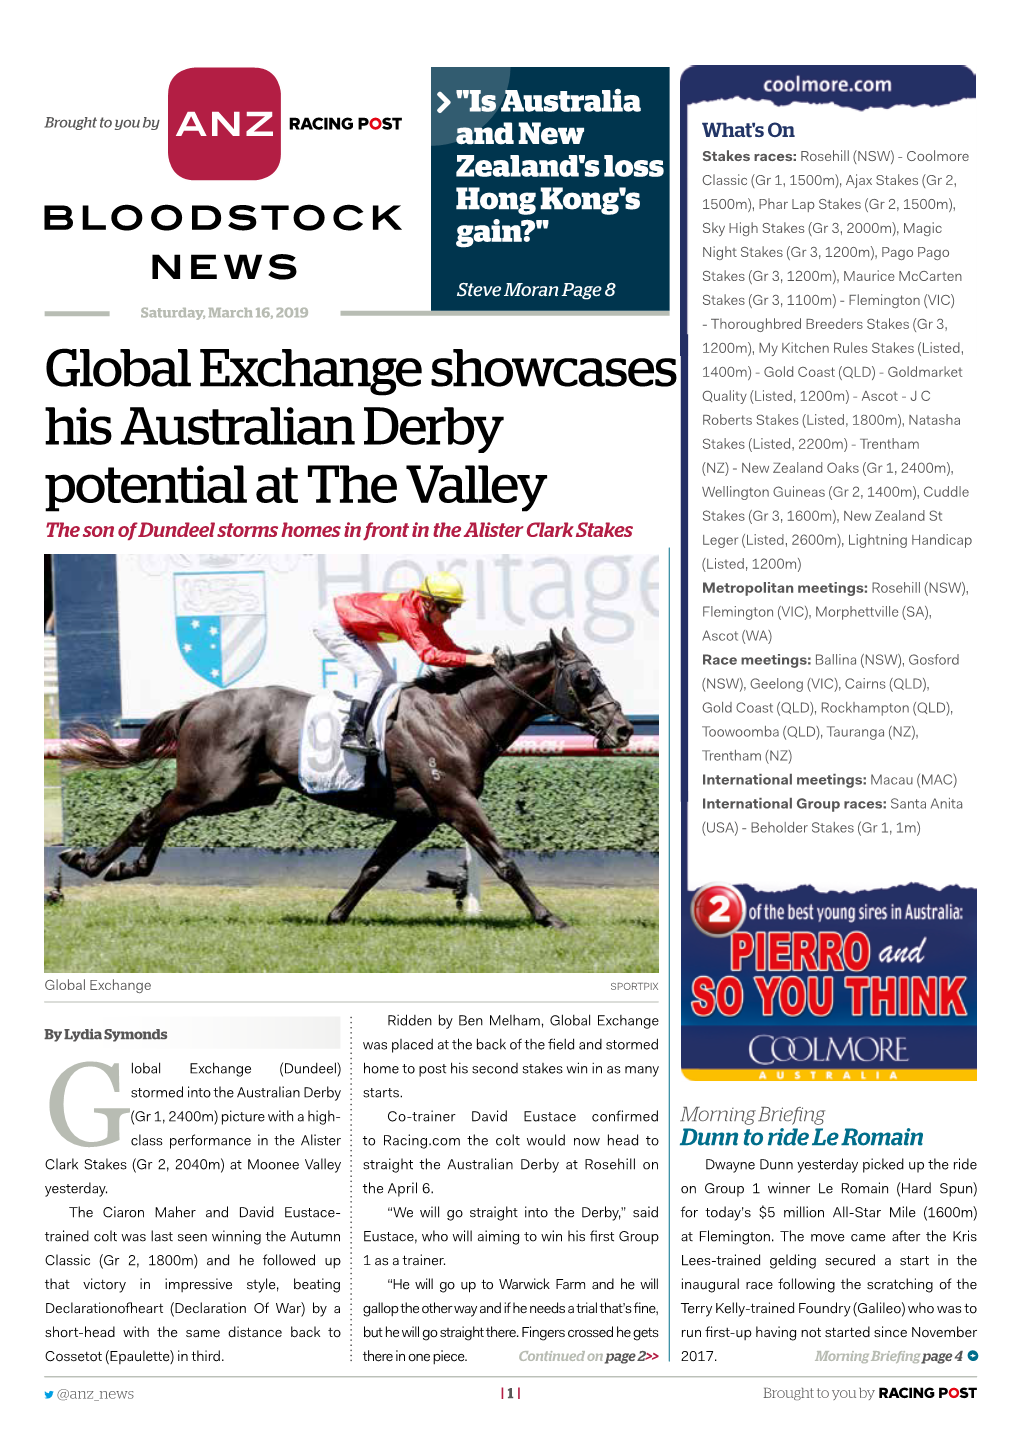 Global Exchange Showcases His Australian Derby Potential at the Valley